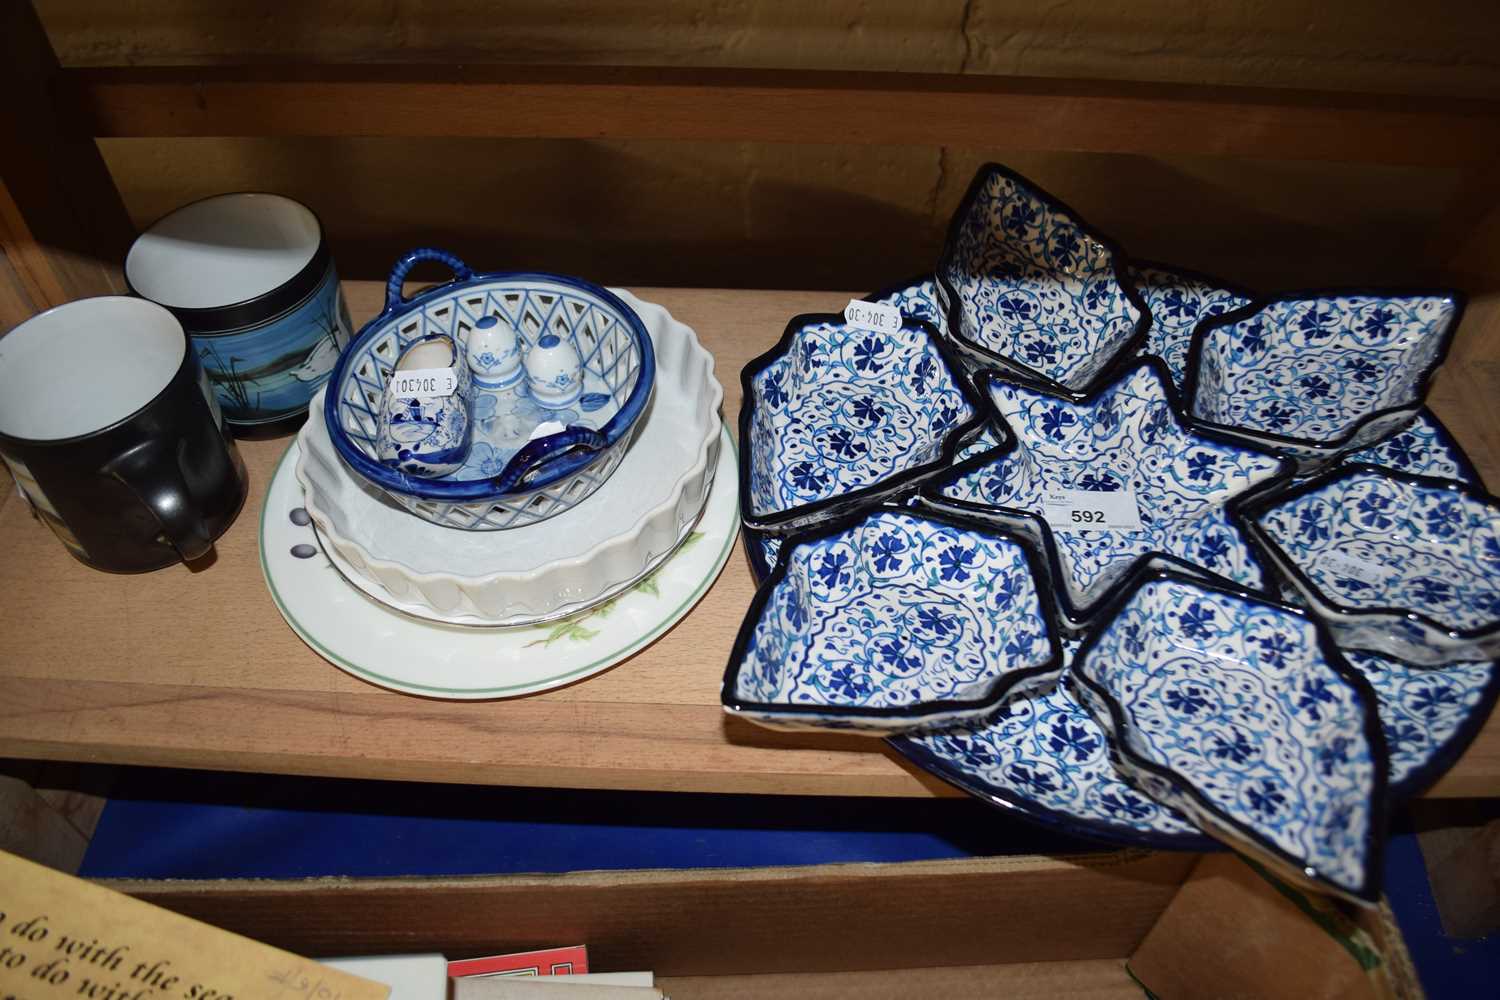 Set of ceramics, mugs, circular tray with small dishes in blue and white design